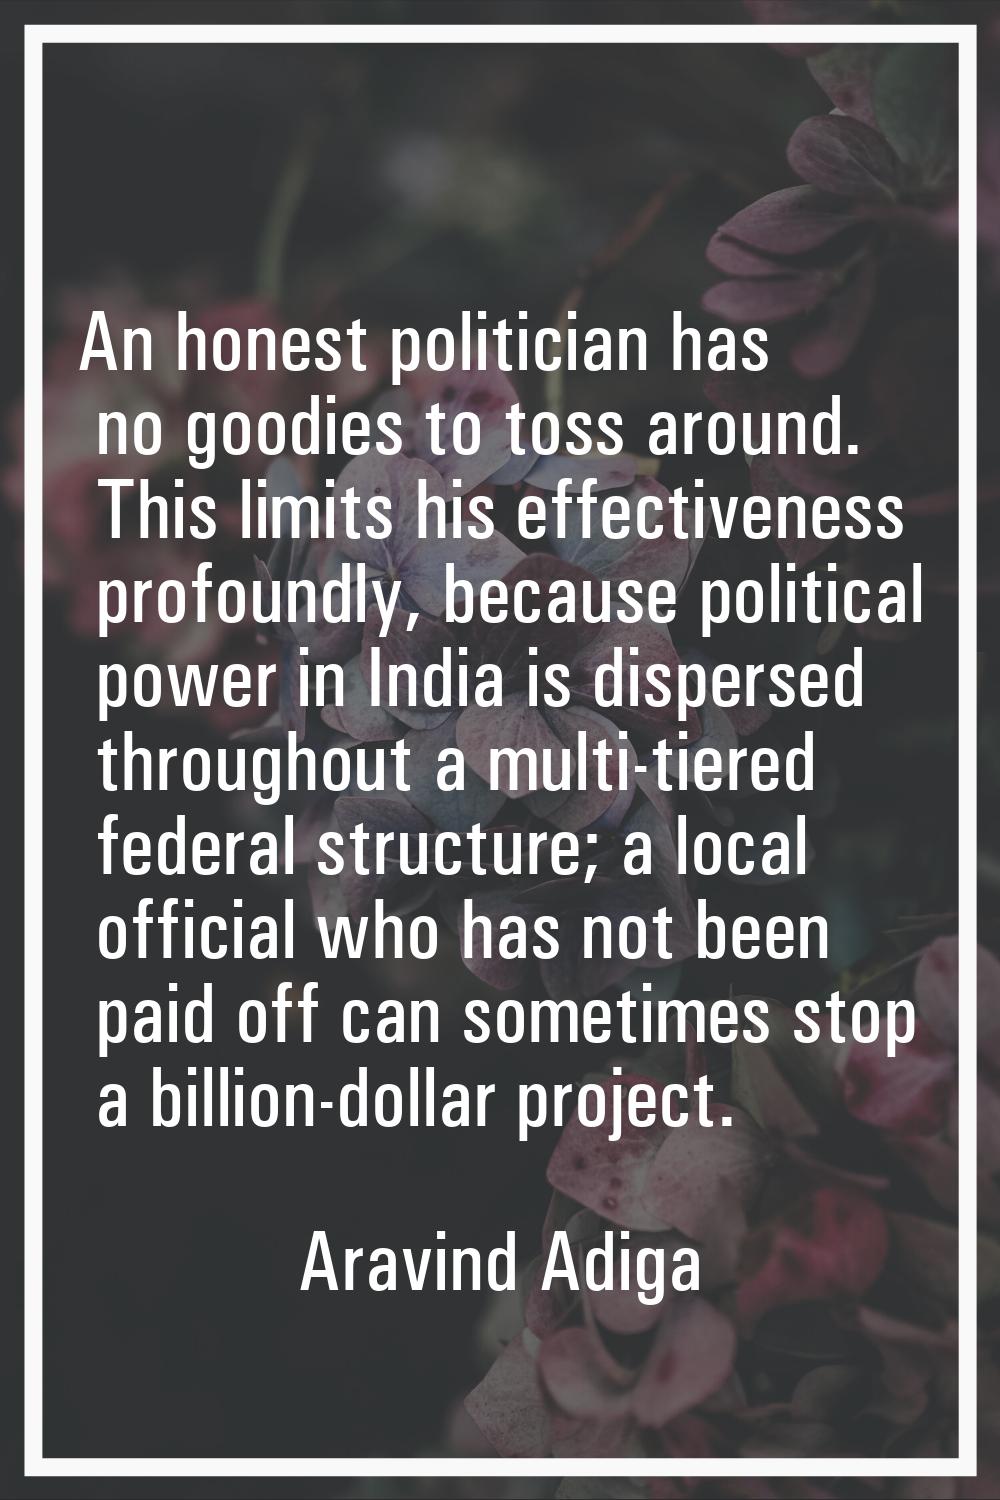 An honest politician has no goodies to toss around. This limits his effectiveness profoundly, becau